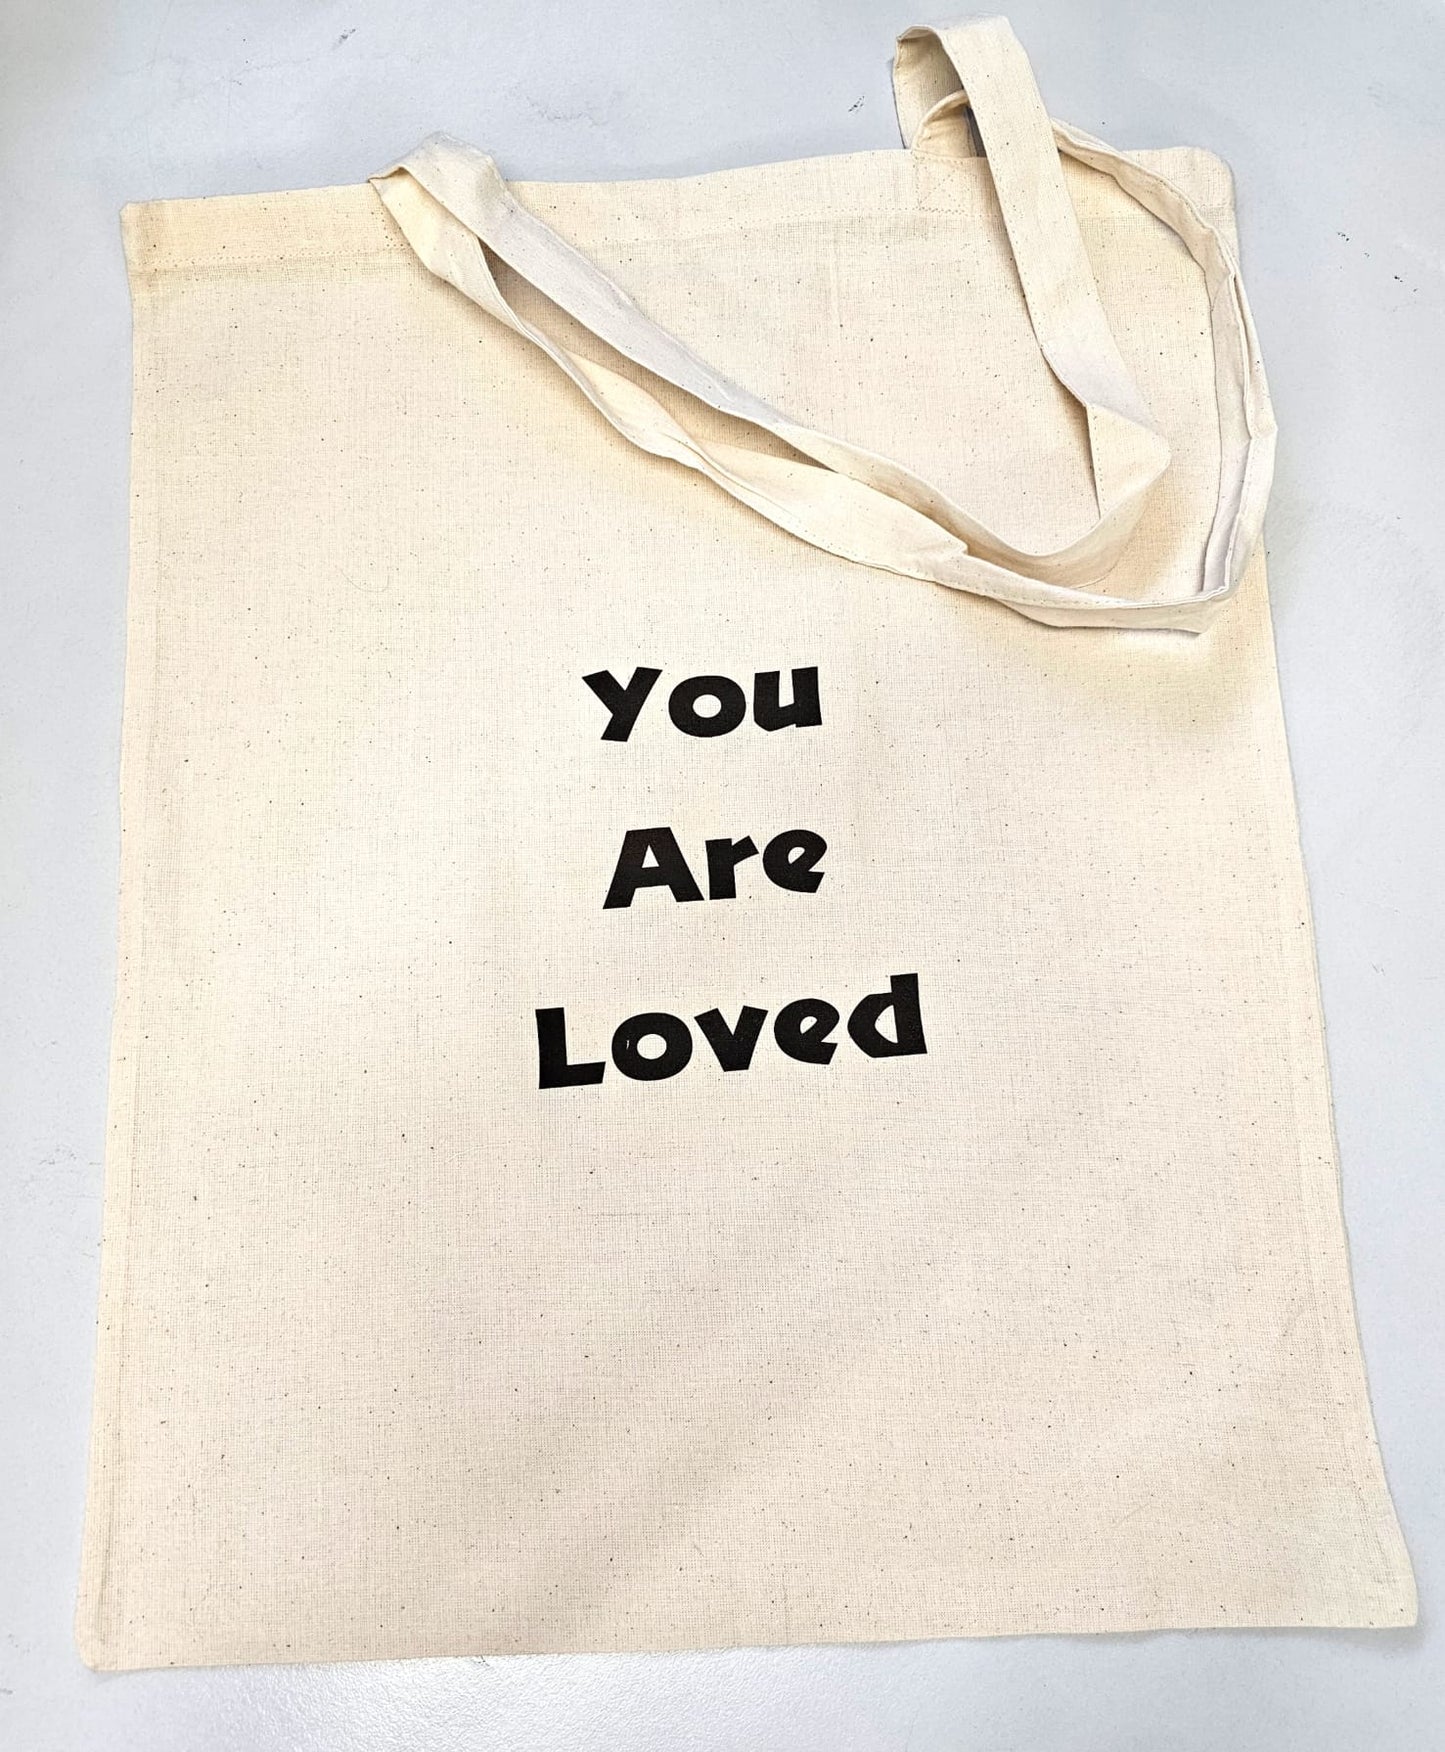 You Are Loved Tote Bags printed on both sides Large 50cm x 40cm